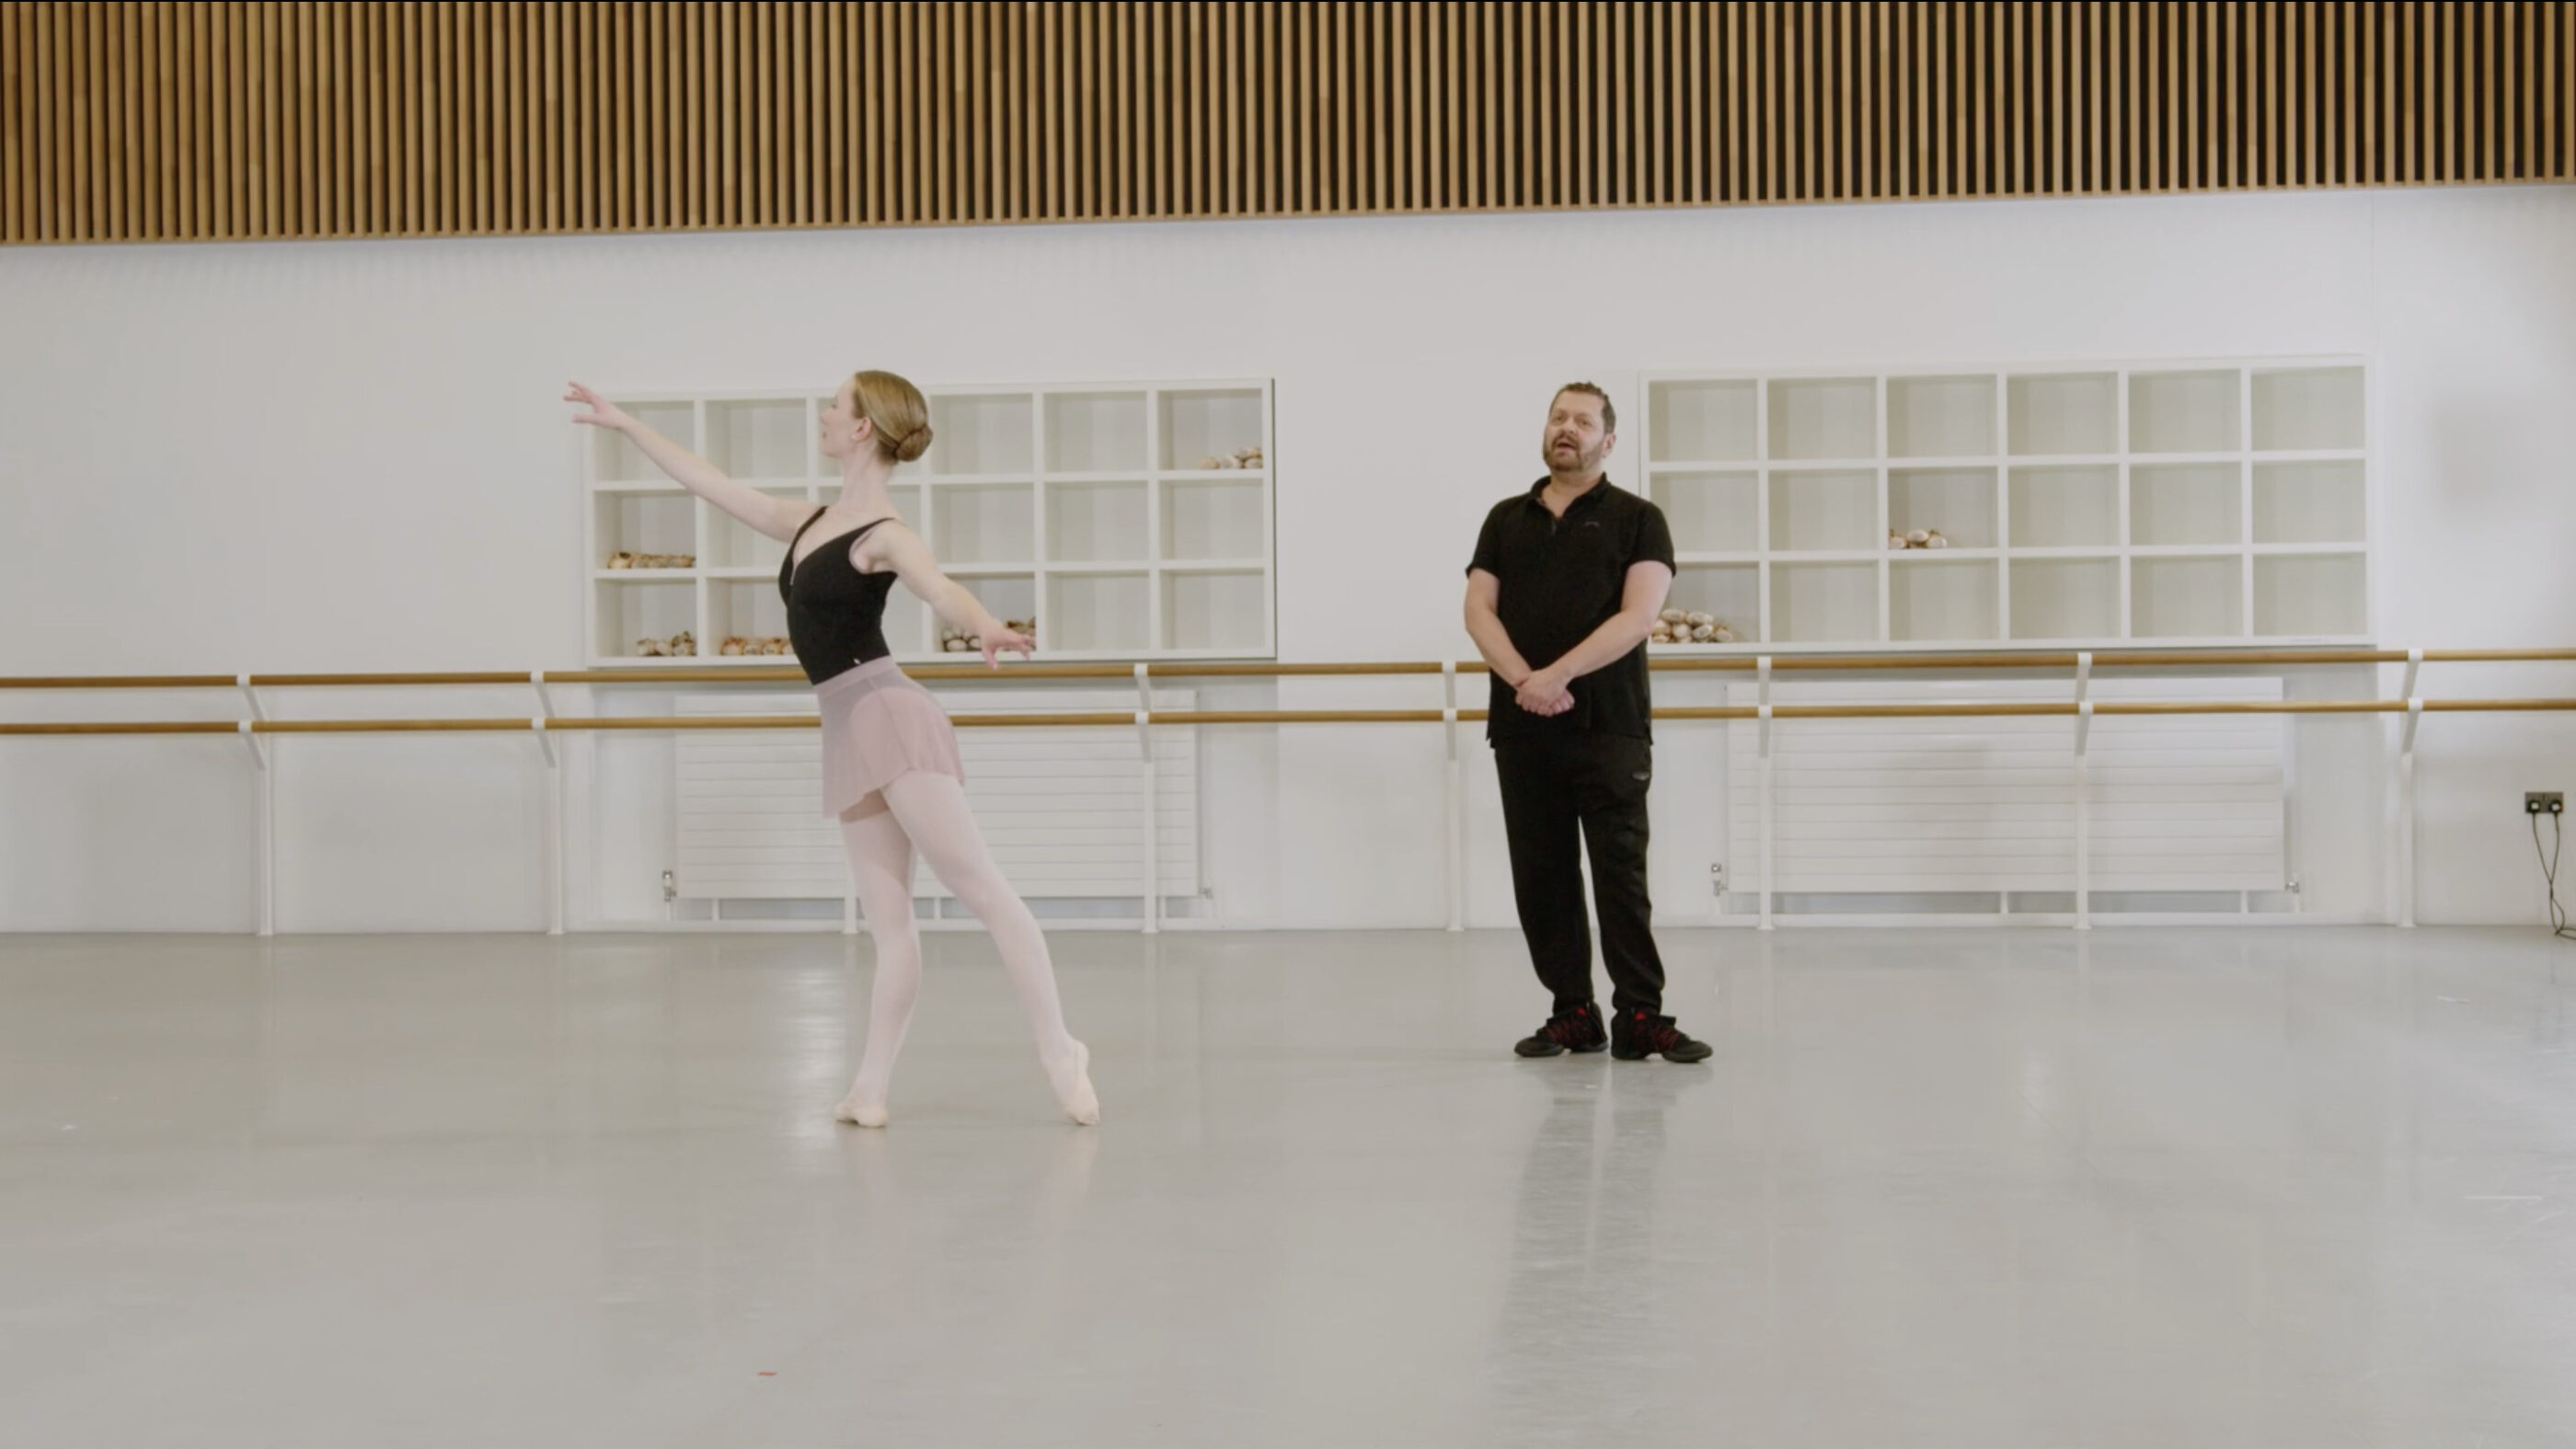 A ballet teacher and a demonstrator are in a dance studio. The demonstrator is doing an arabesque in tendu while the teacher is looking in front of him. The demonstrator is wearing a dark leotard and pink skirt, the teacher is wearing a black t-shirt and trousers.